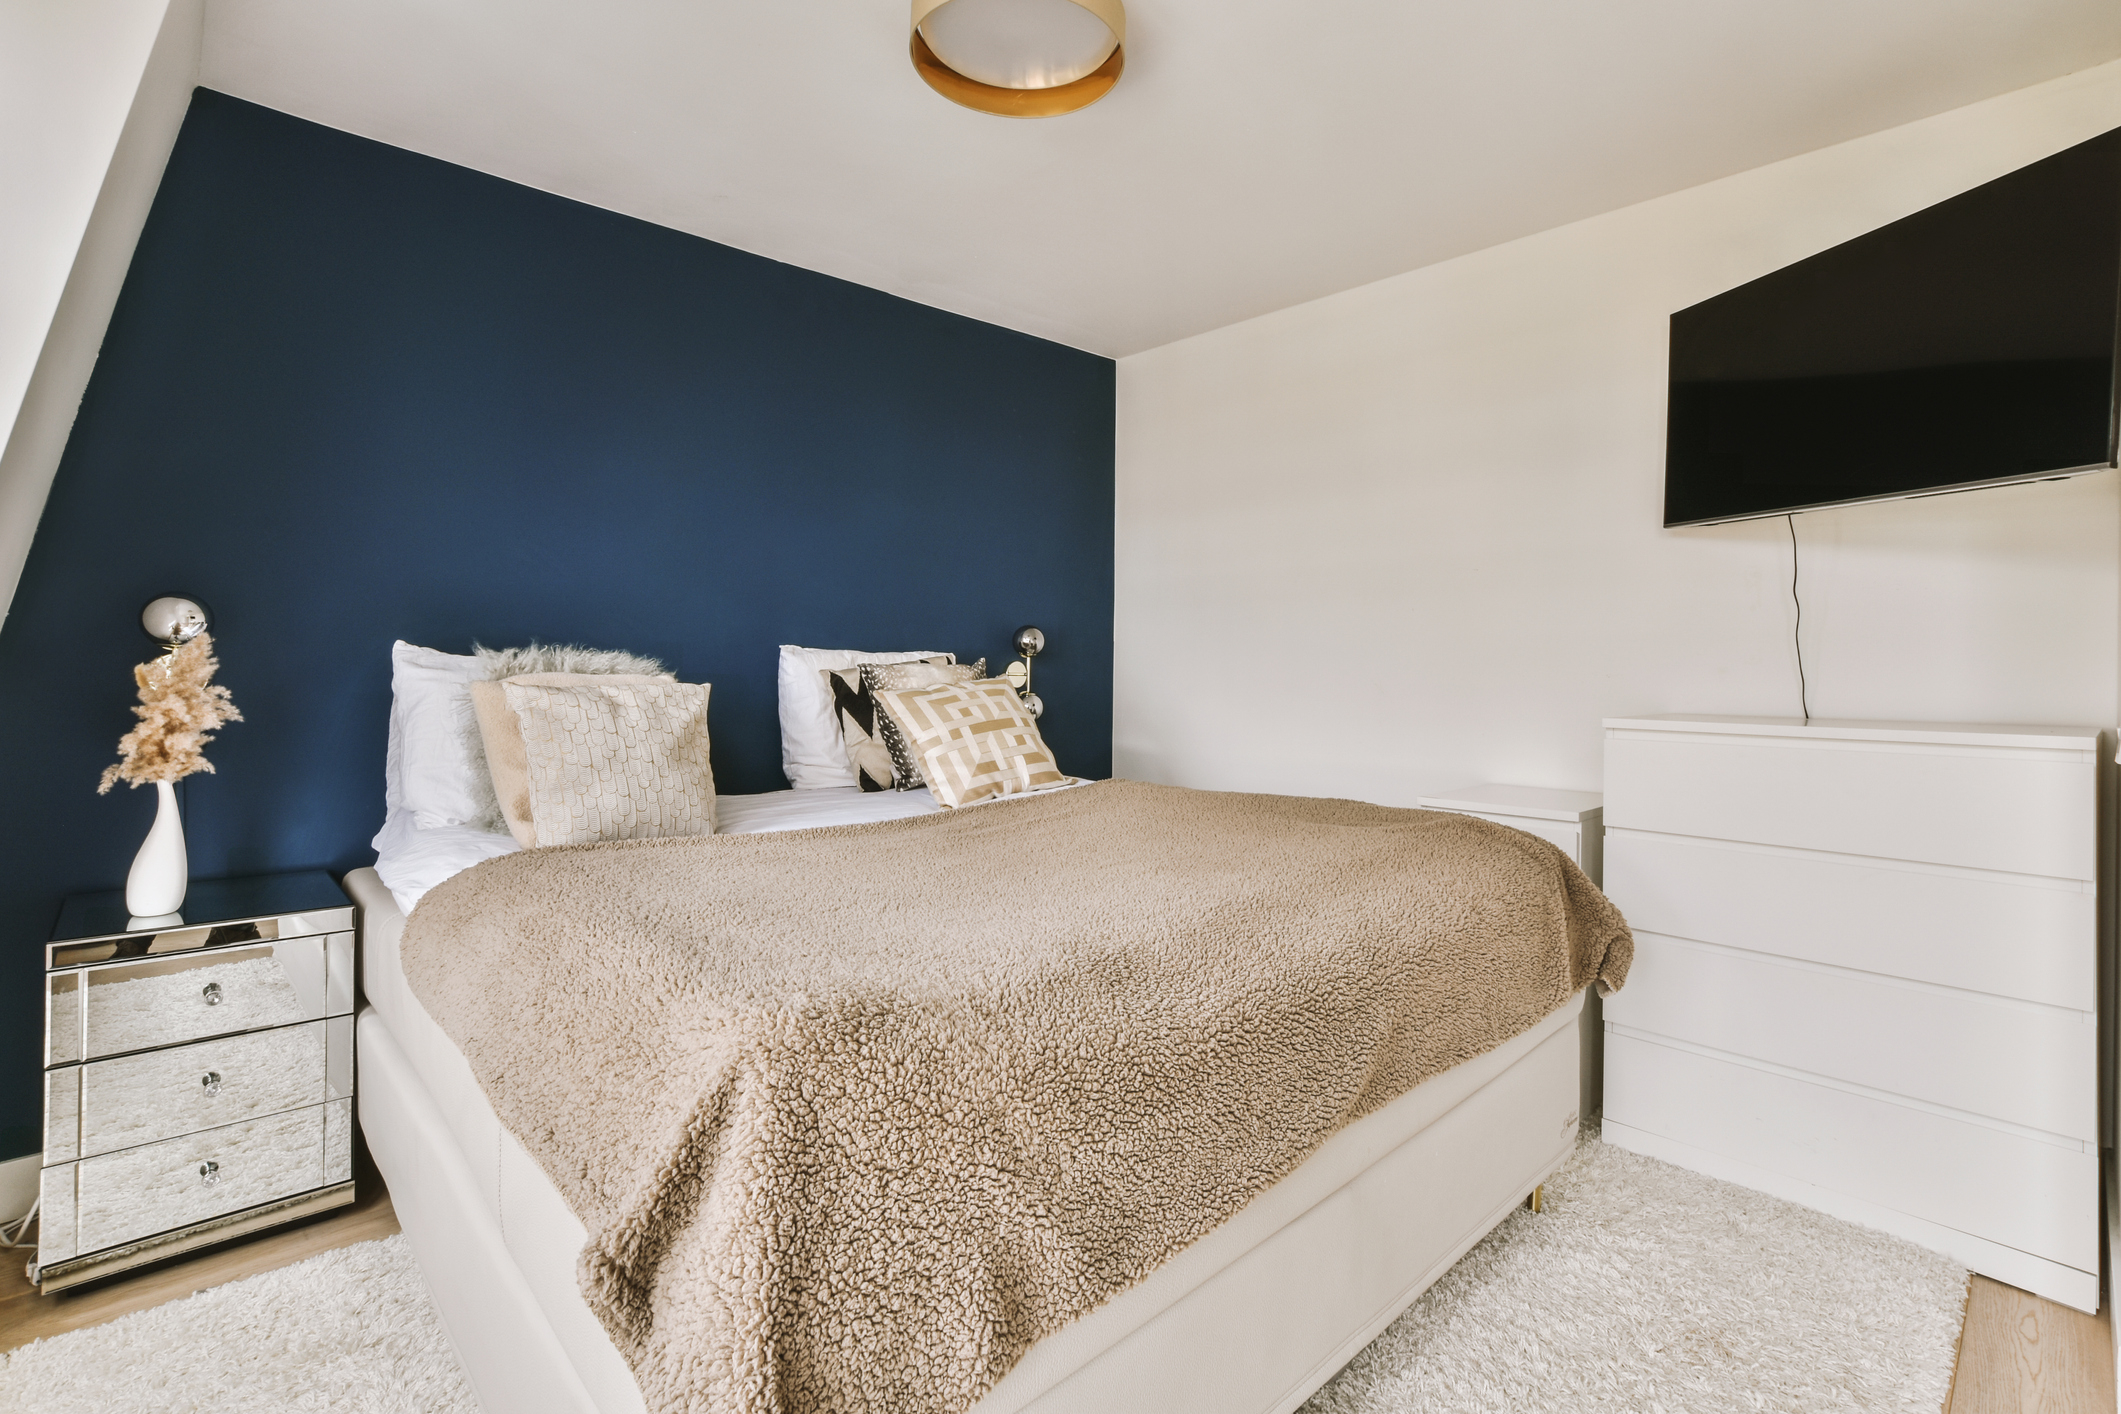 Bedroom with a bed, nightstands, and TV, featuring a prominent navy accent wall